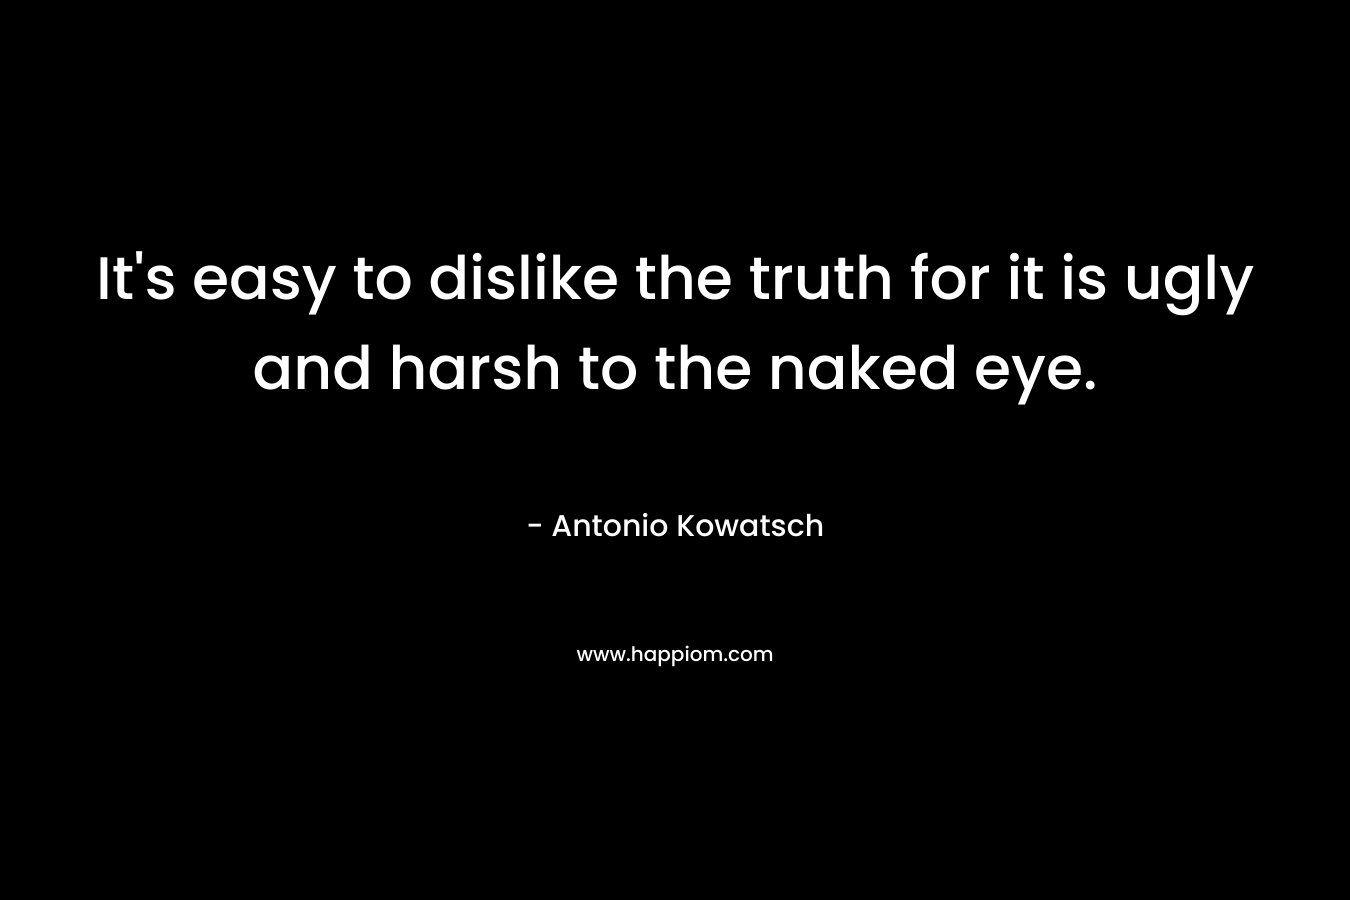 It's easy to dislike the truth for it is ugly and harsh to the naked eye.